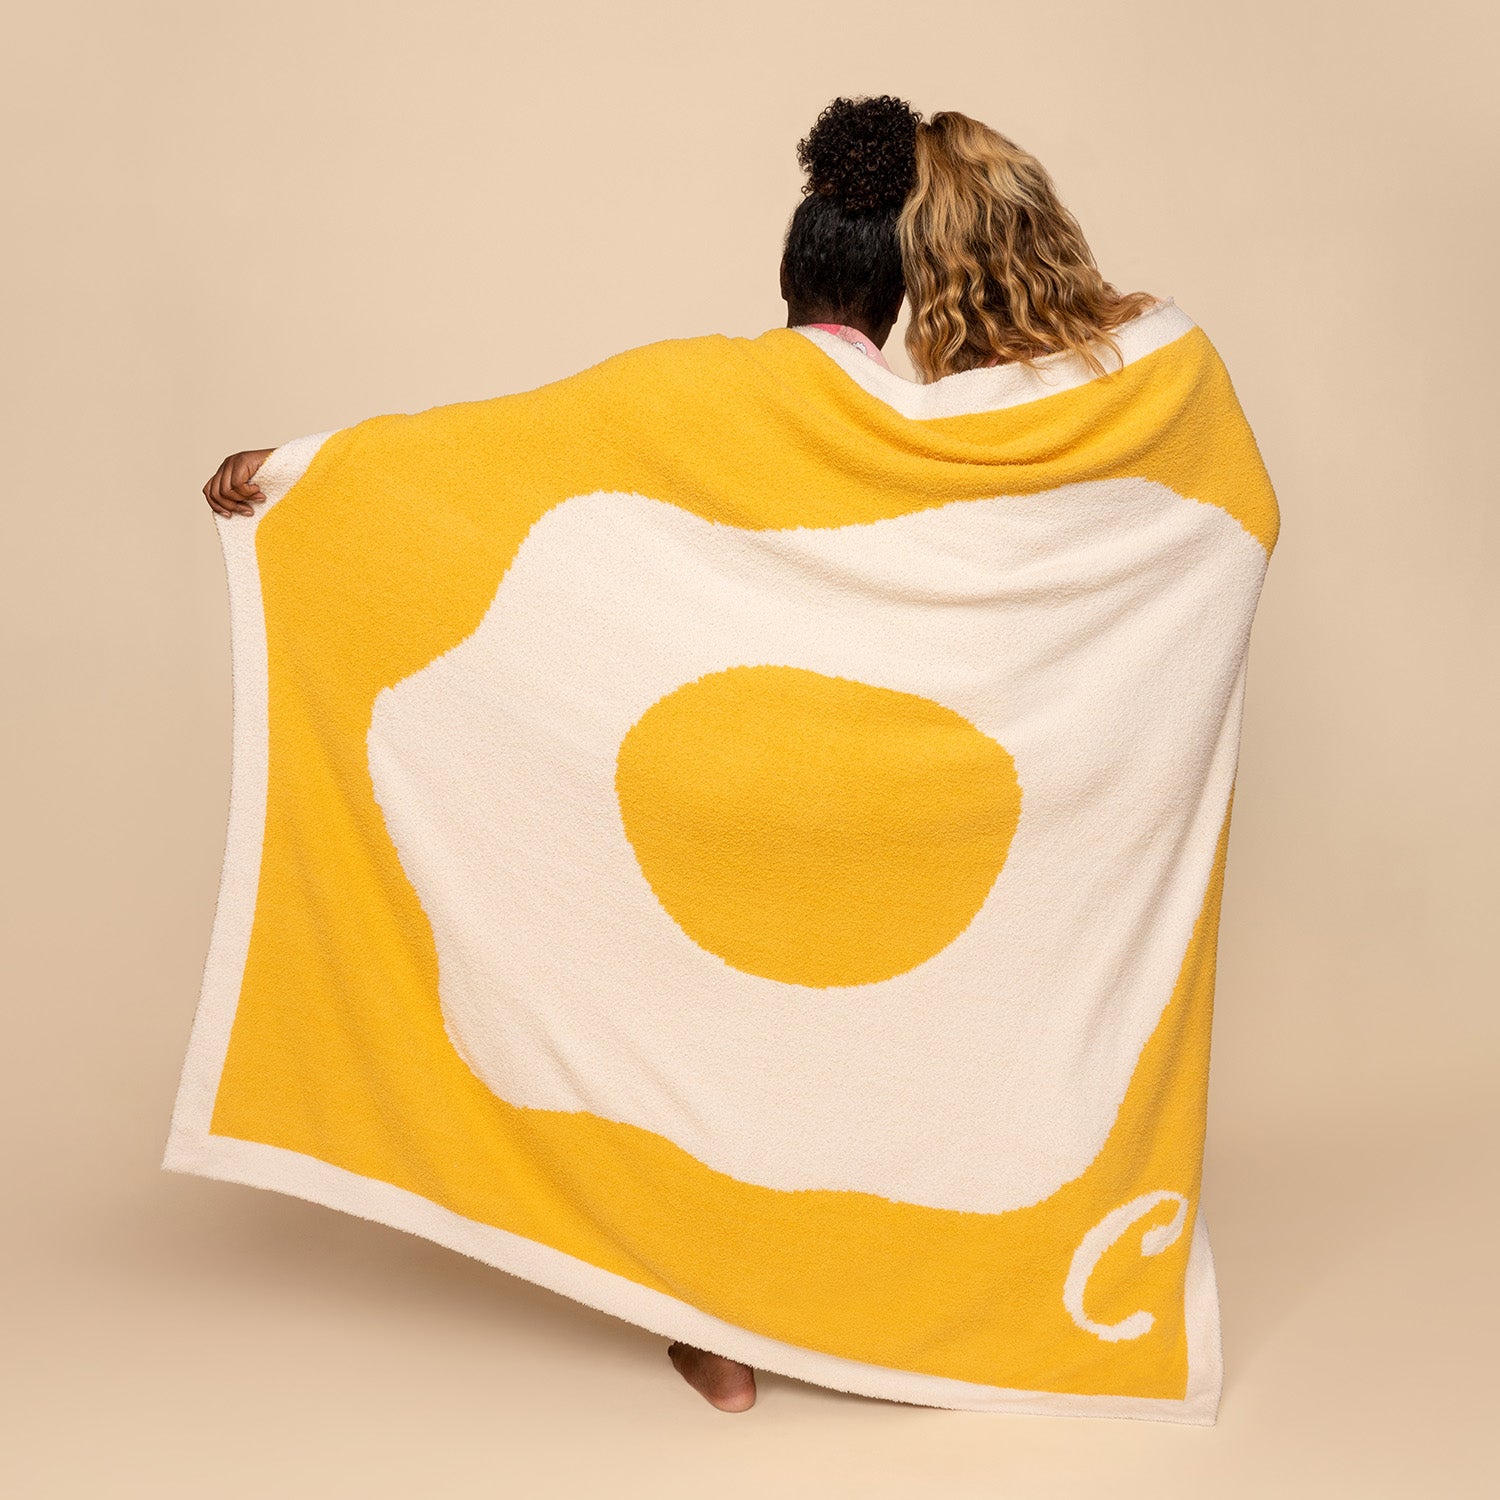 Chef's Kiss Blanket in Sunny Side Up